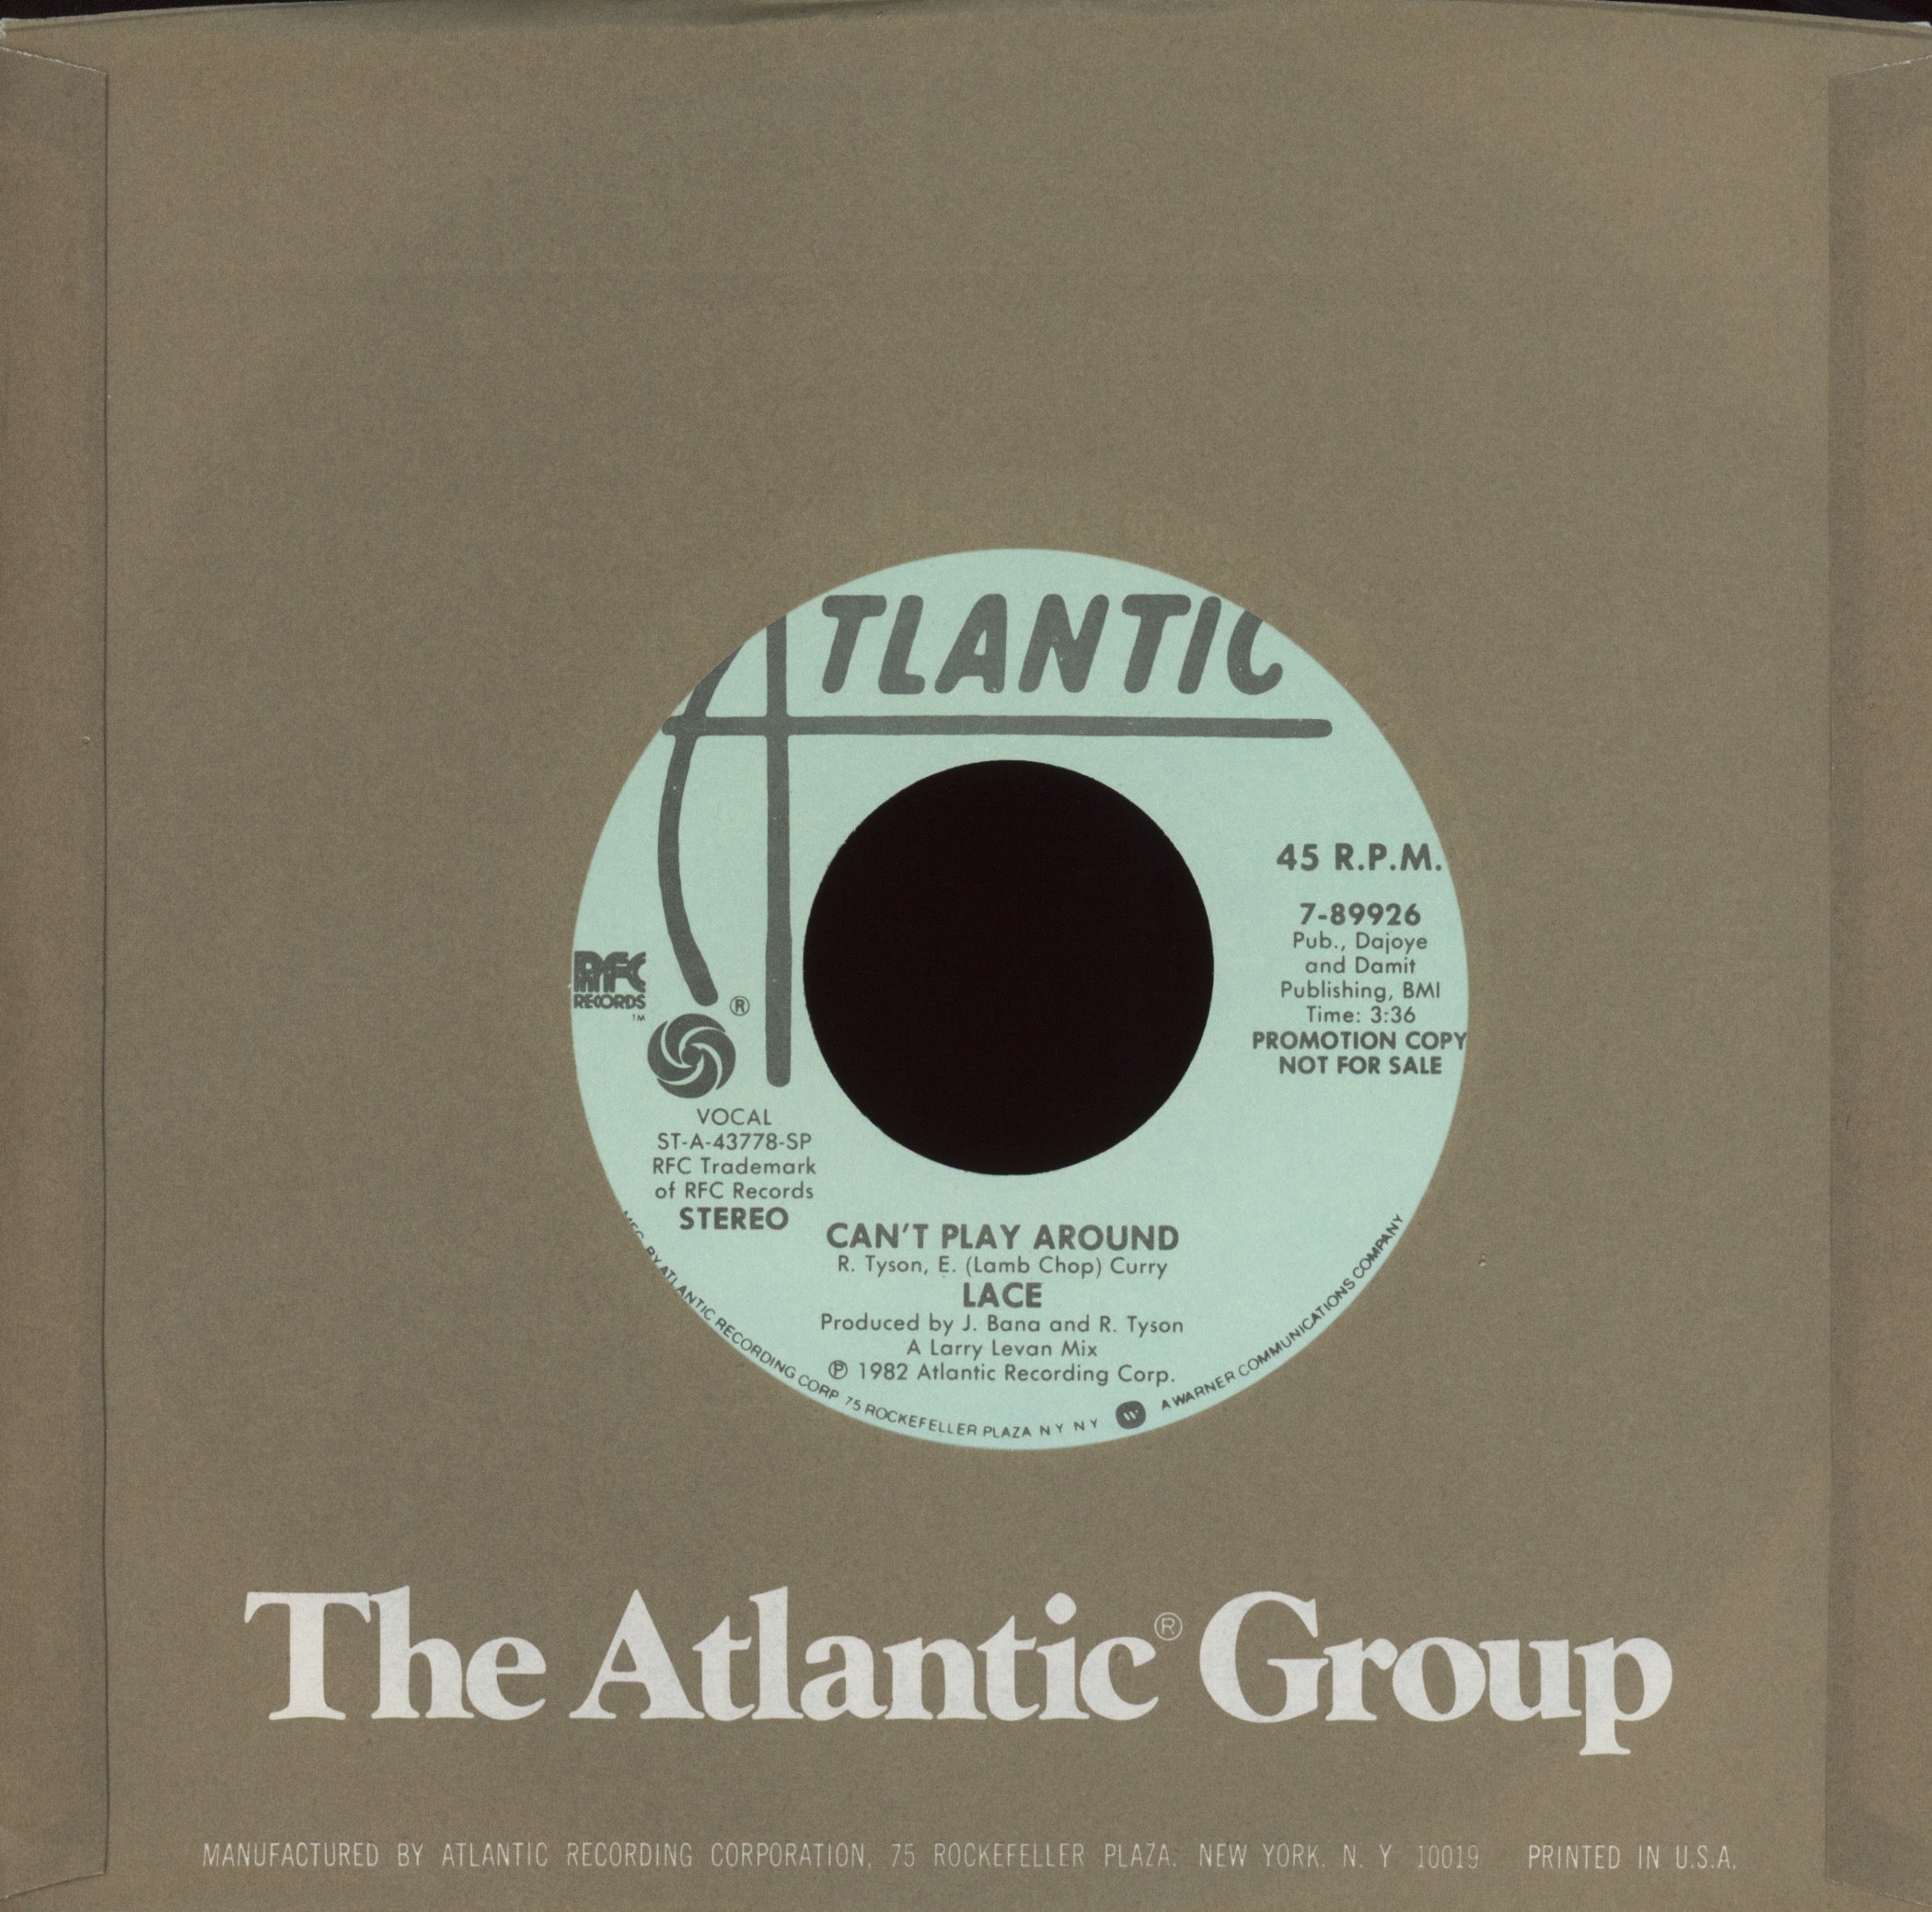 Lace - Can't Play Around on Atlantic Promo